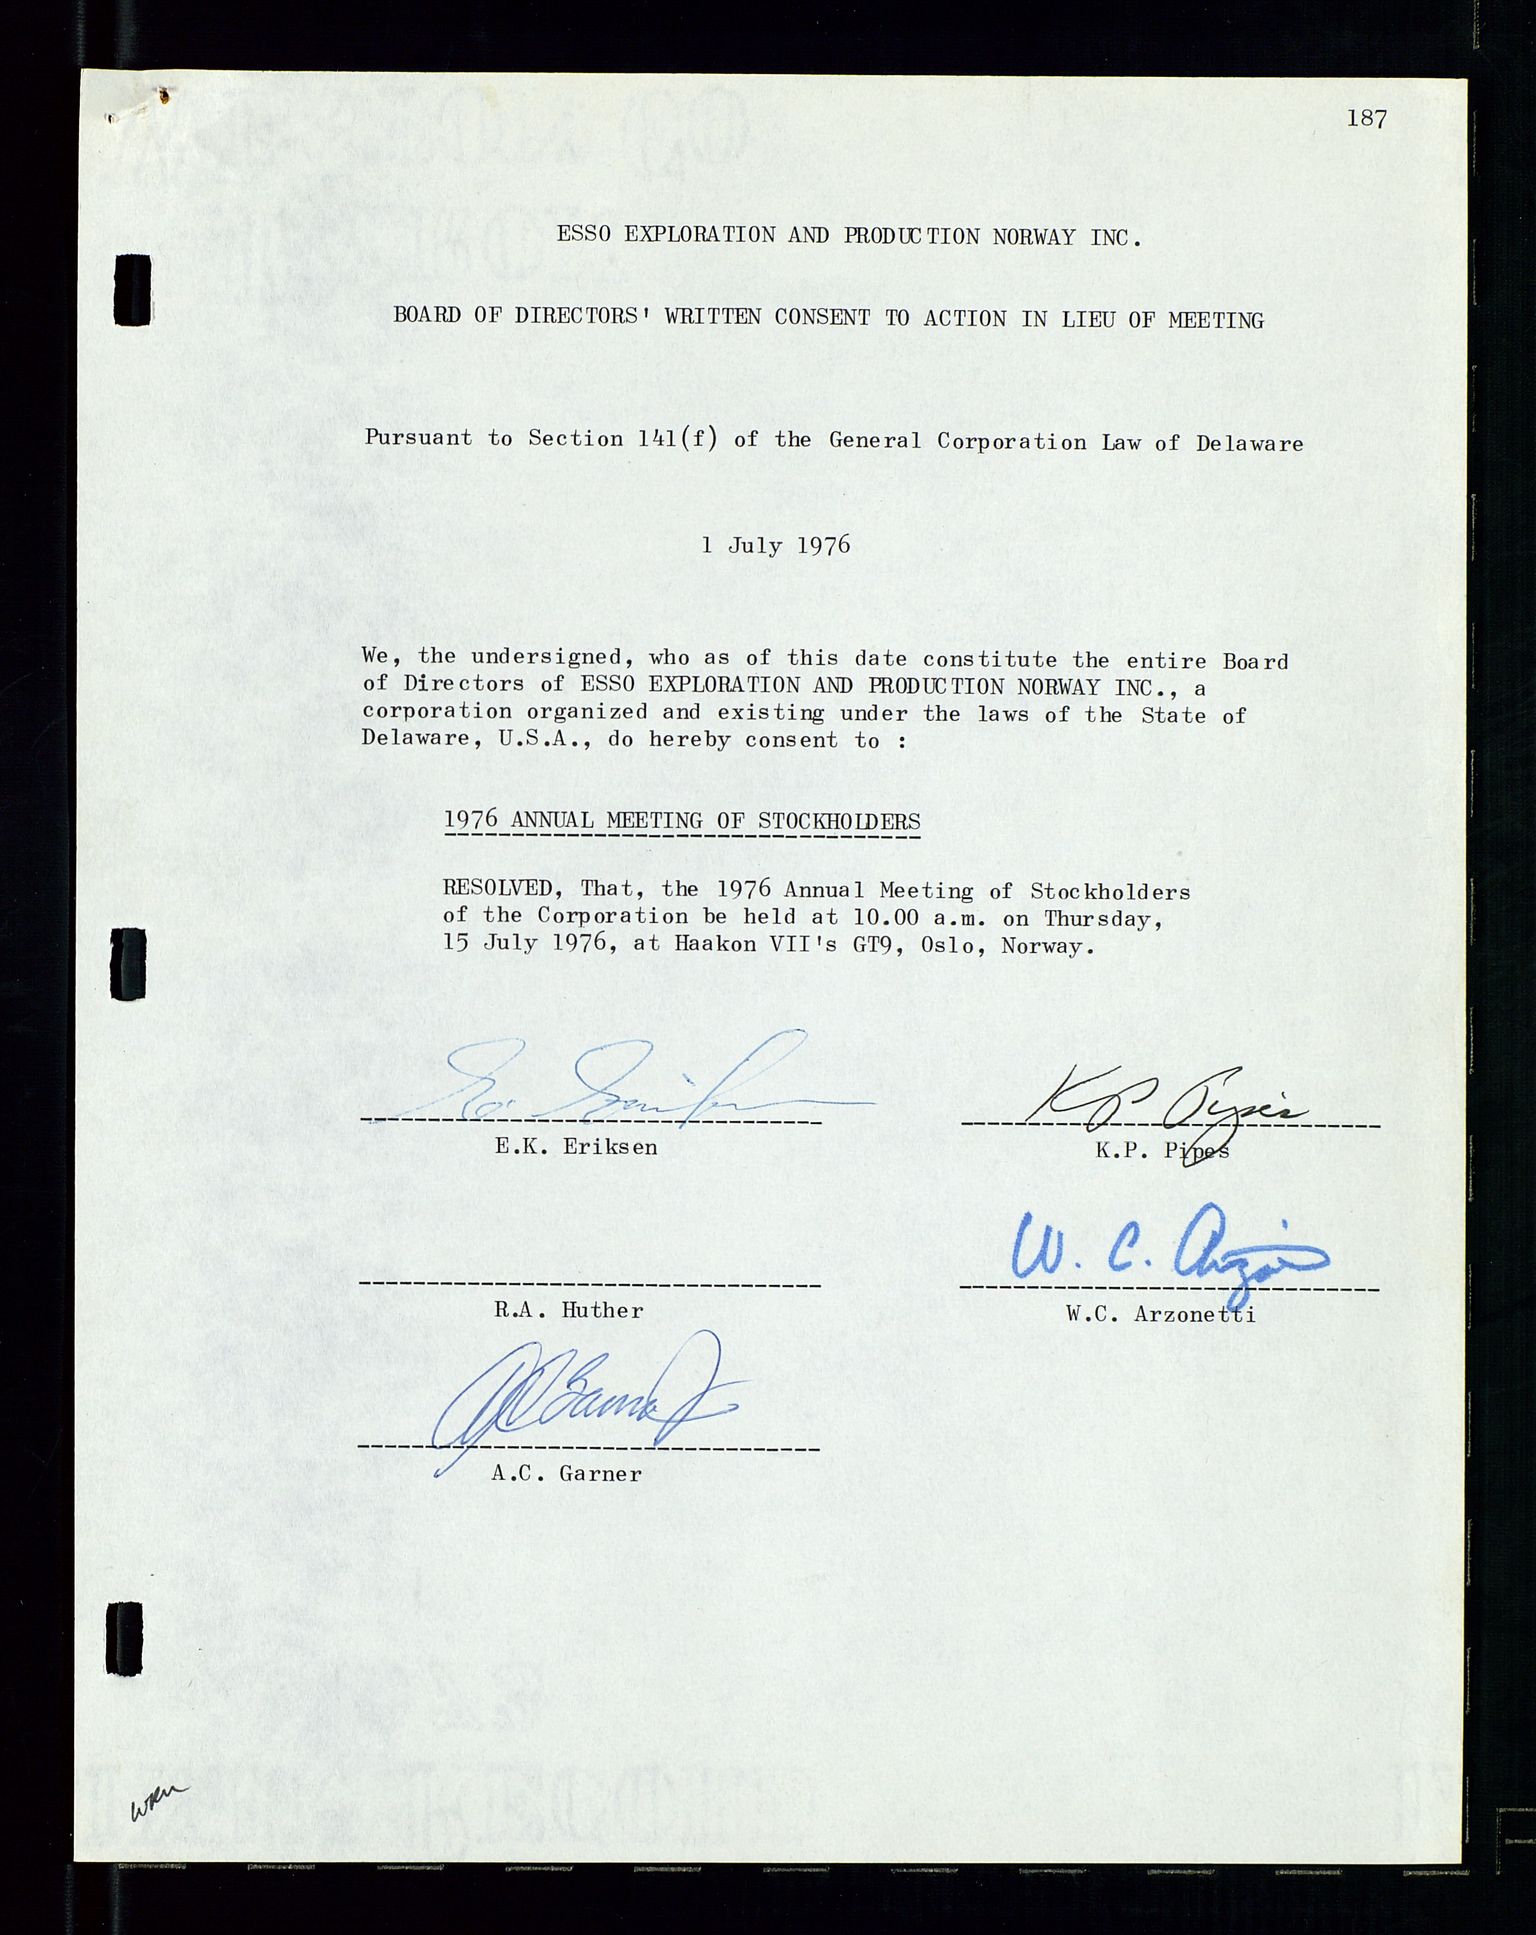 Pa 1512 - Esso Exploration and Production Norway Inc., SAST/A-101917/A/Aa/L0001/0002: Styredokumenter / Corporate records, Board meeting minutes, Agreements, Stocholder meetings, 1975-1979, p. 29